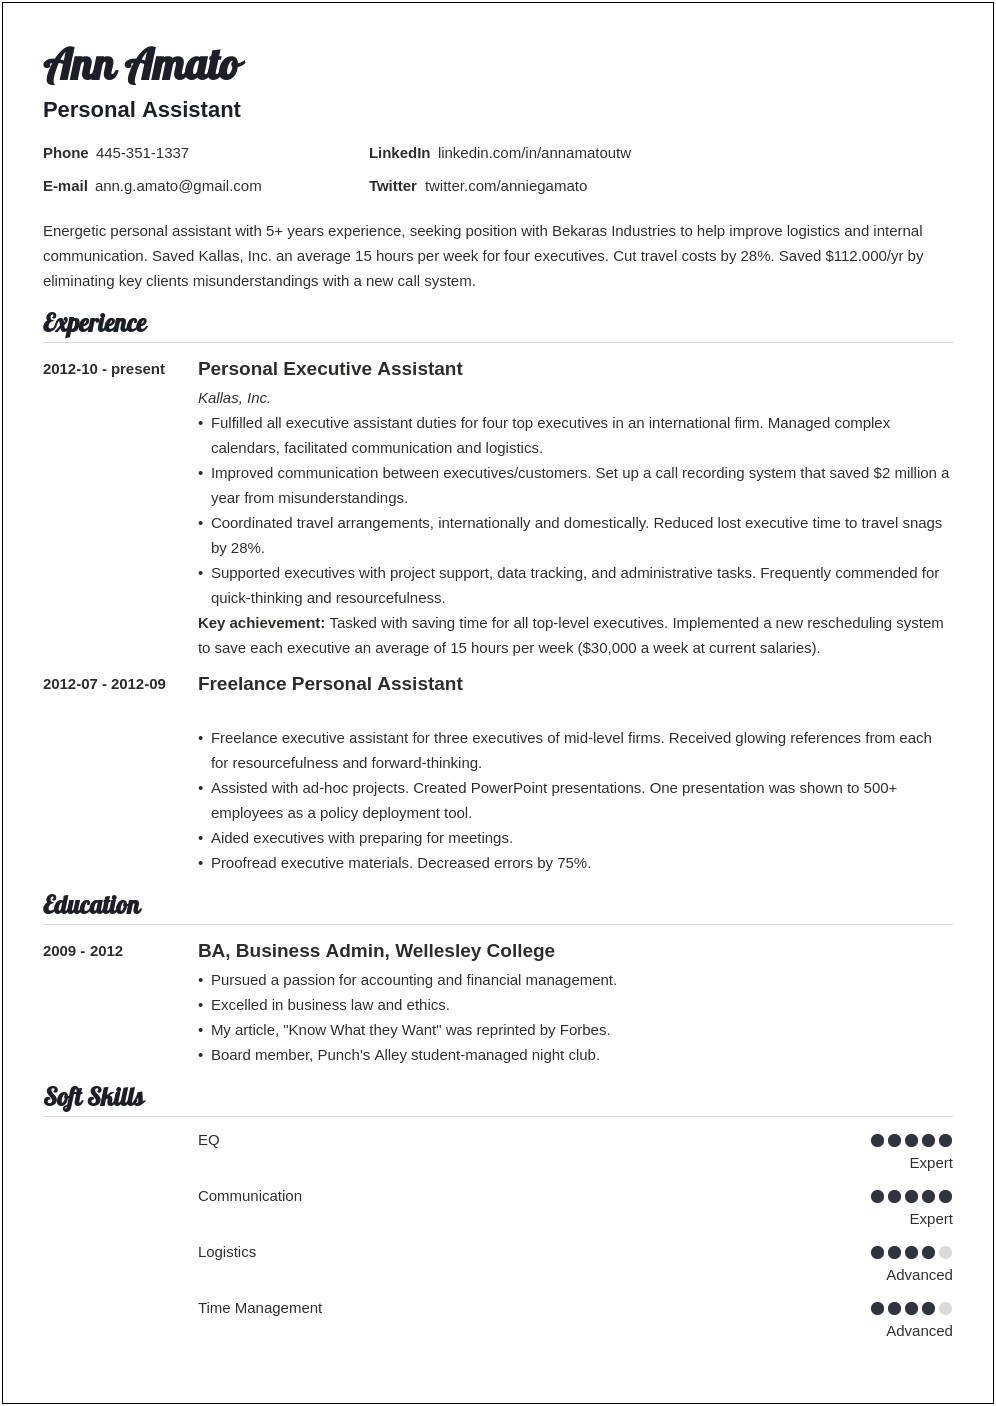 3 Month Job On Application But Not Resume